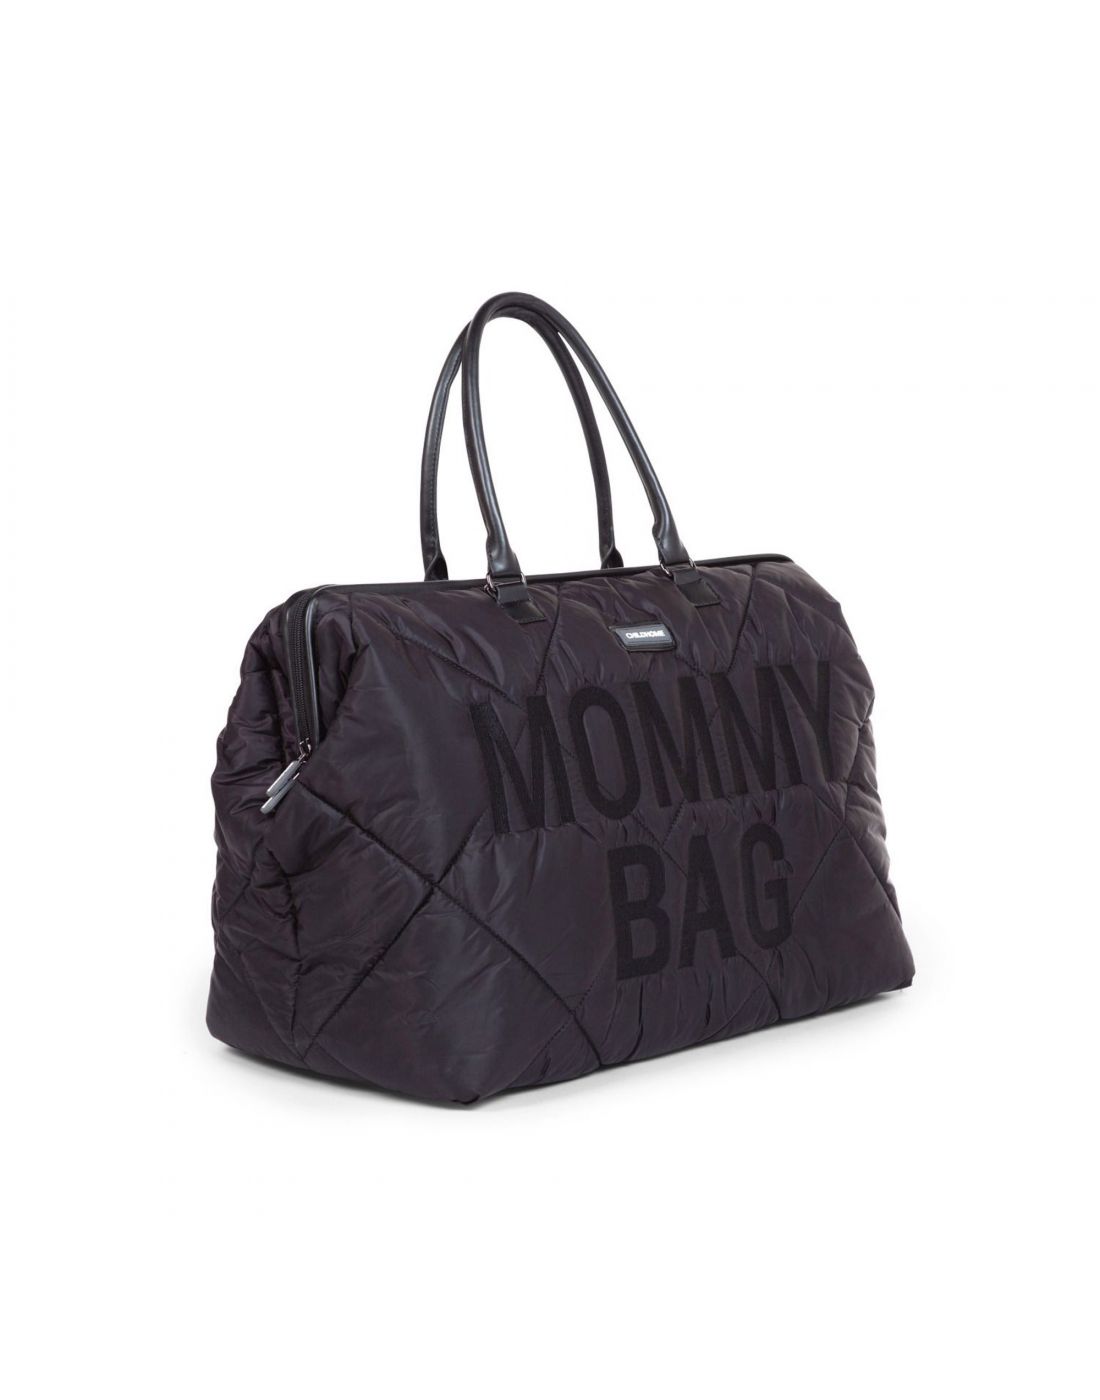 Childhome Mommy Bag Puffered Black